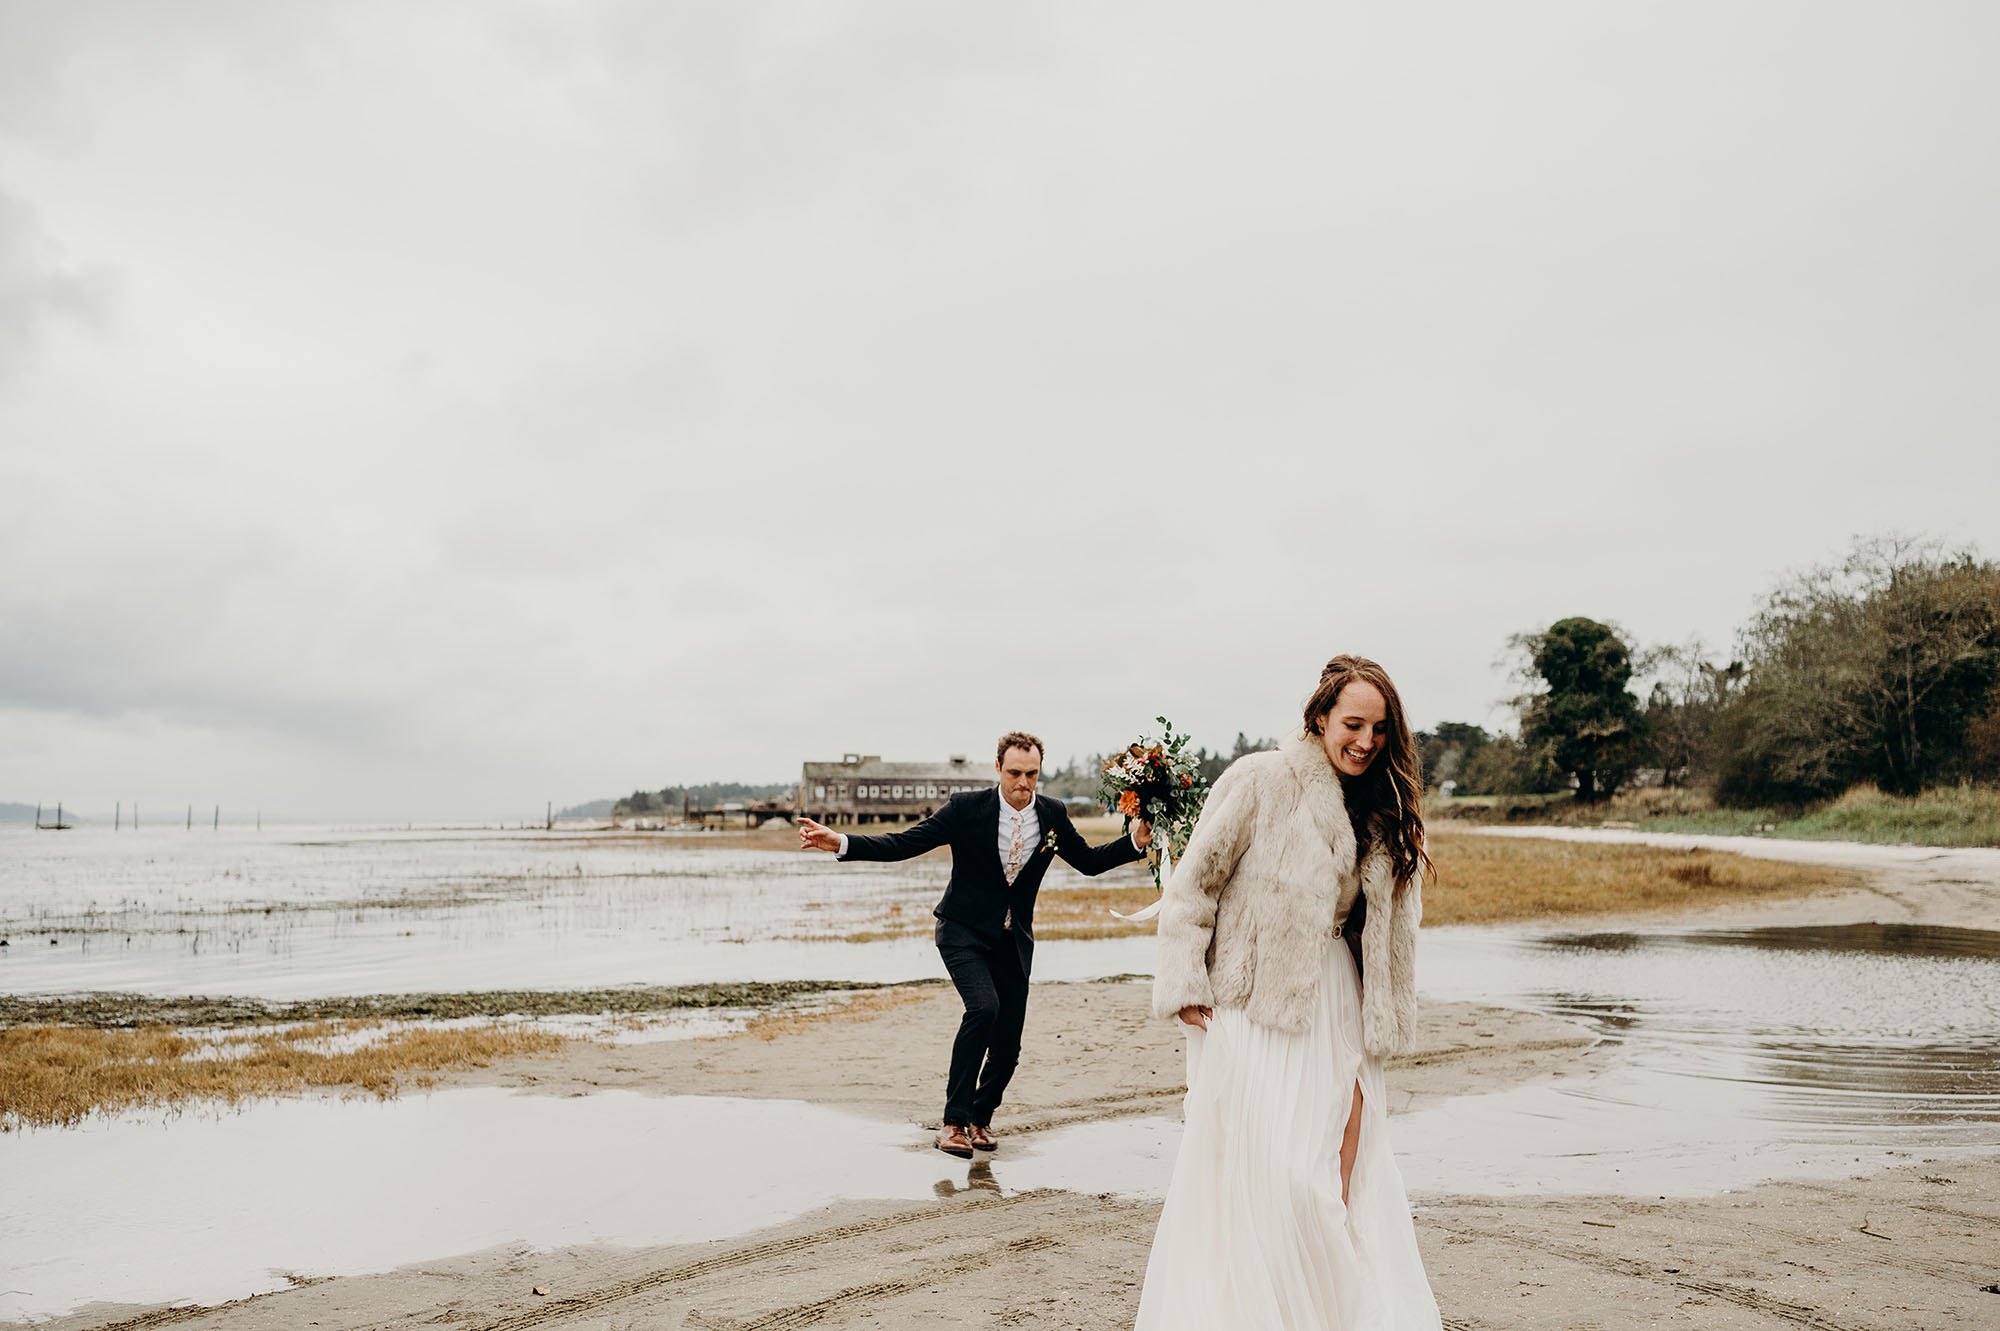 Bride & Groom Walking on the Beach by Briana Morrison Photography